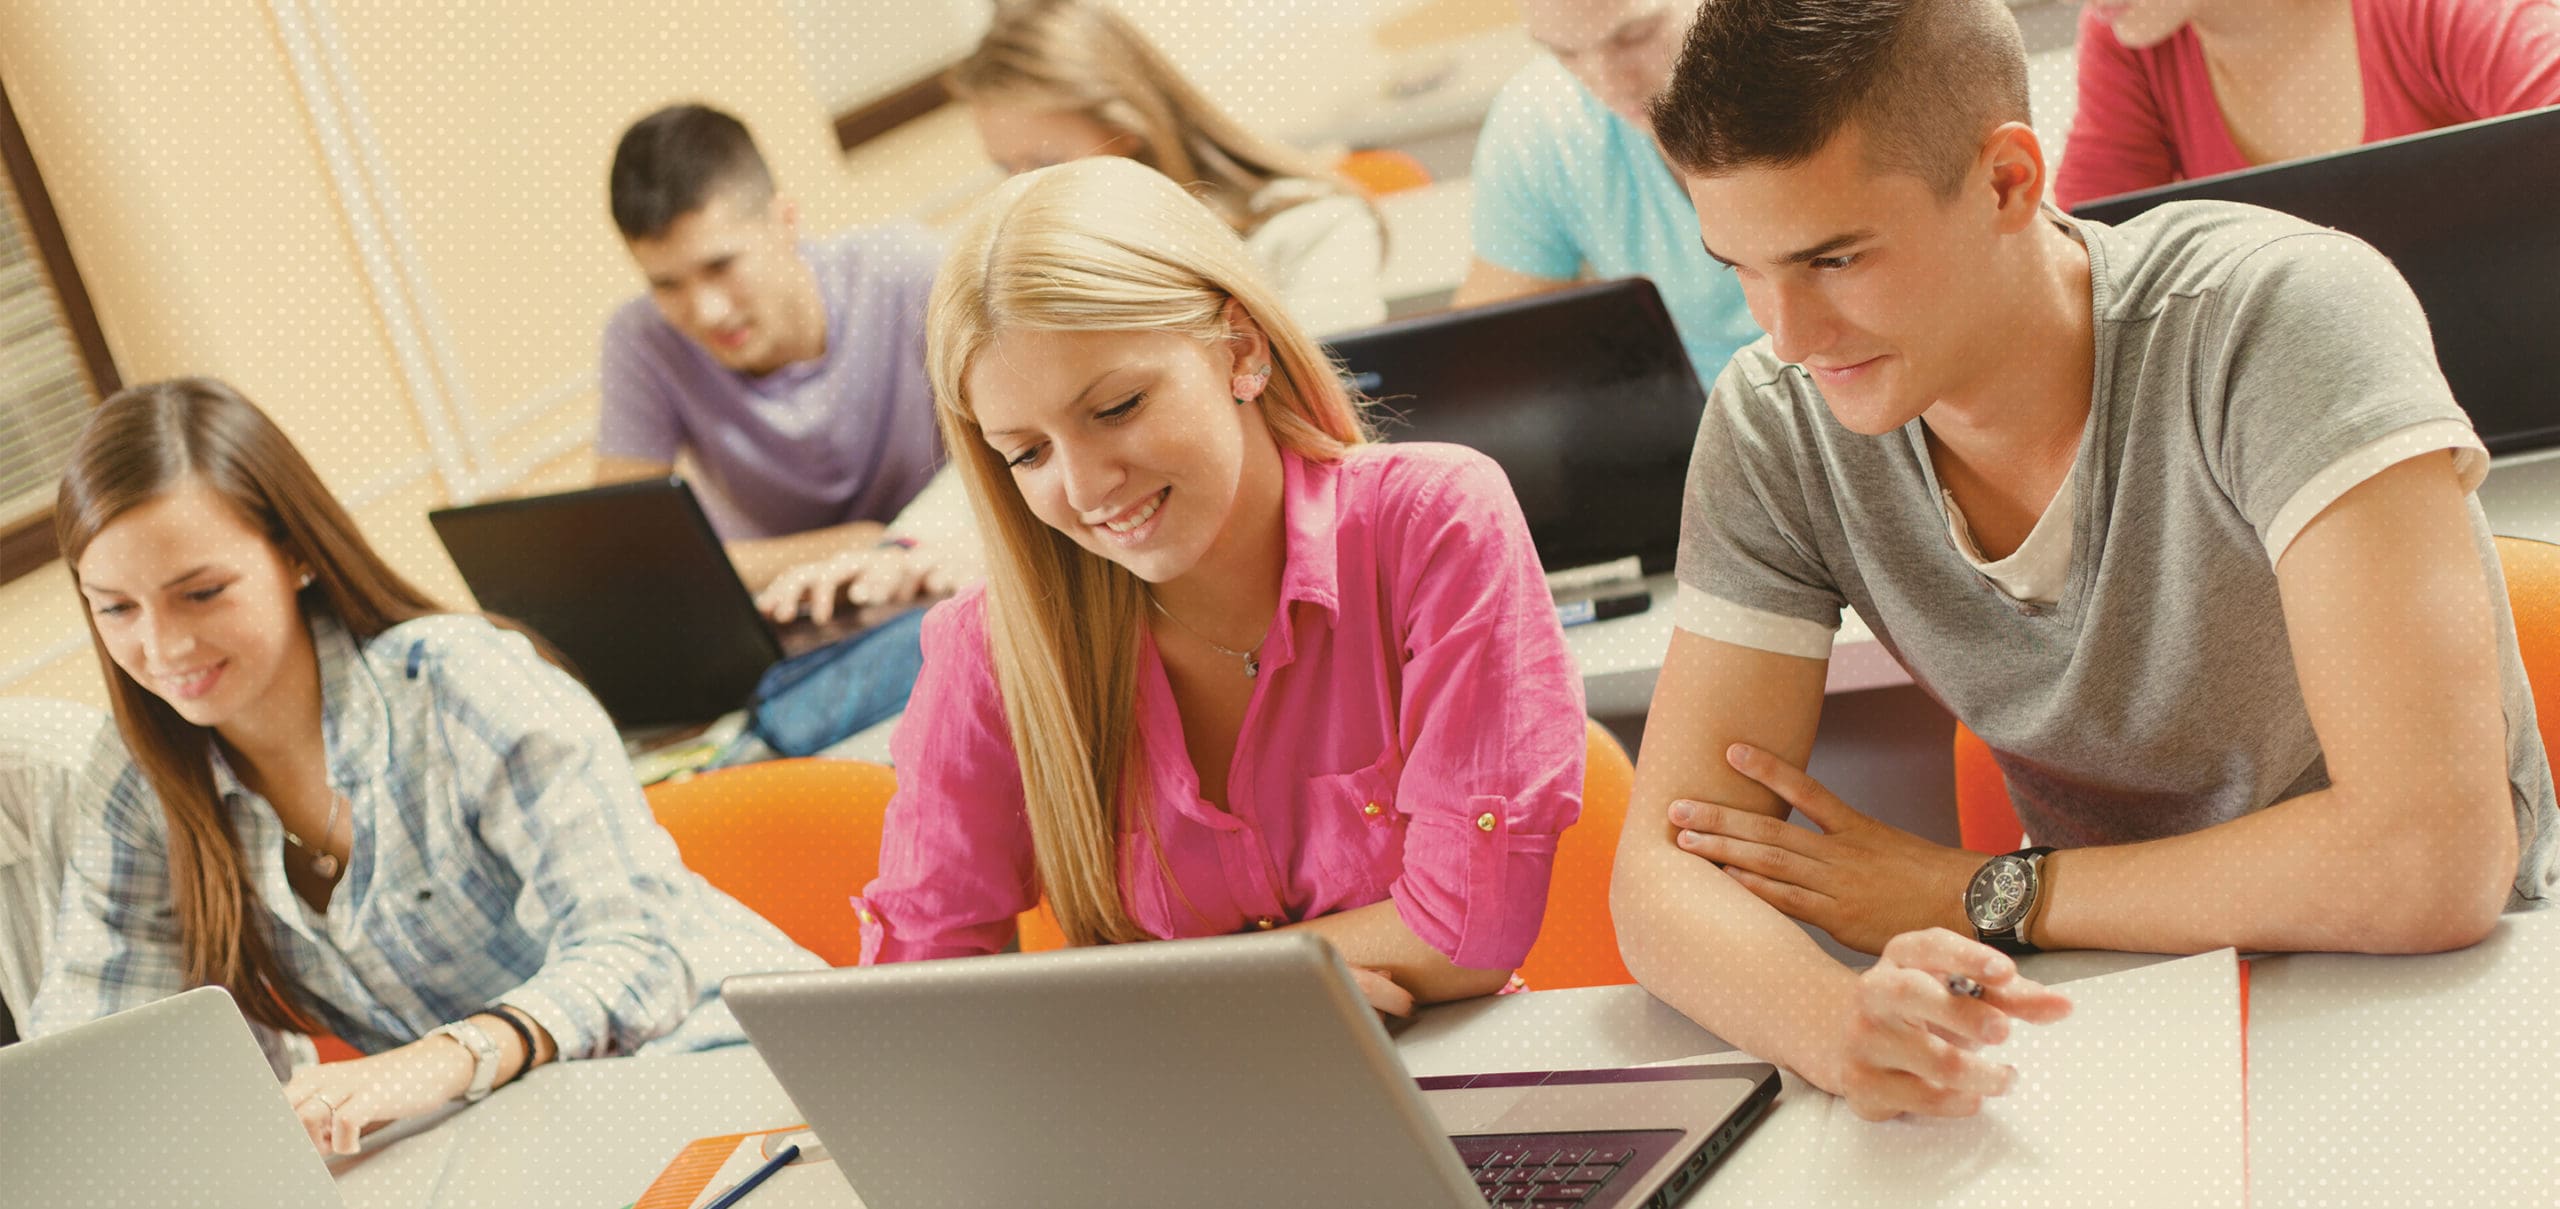 4 Tips for Making Friends in Your Online Class - ASU Prep Digital